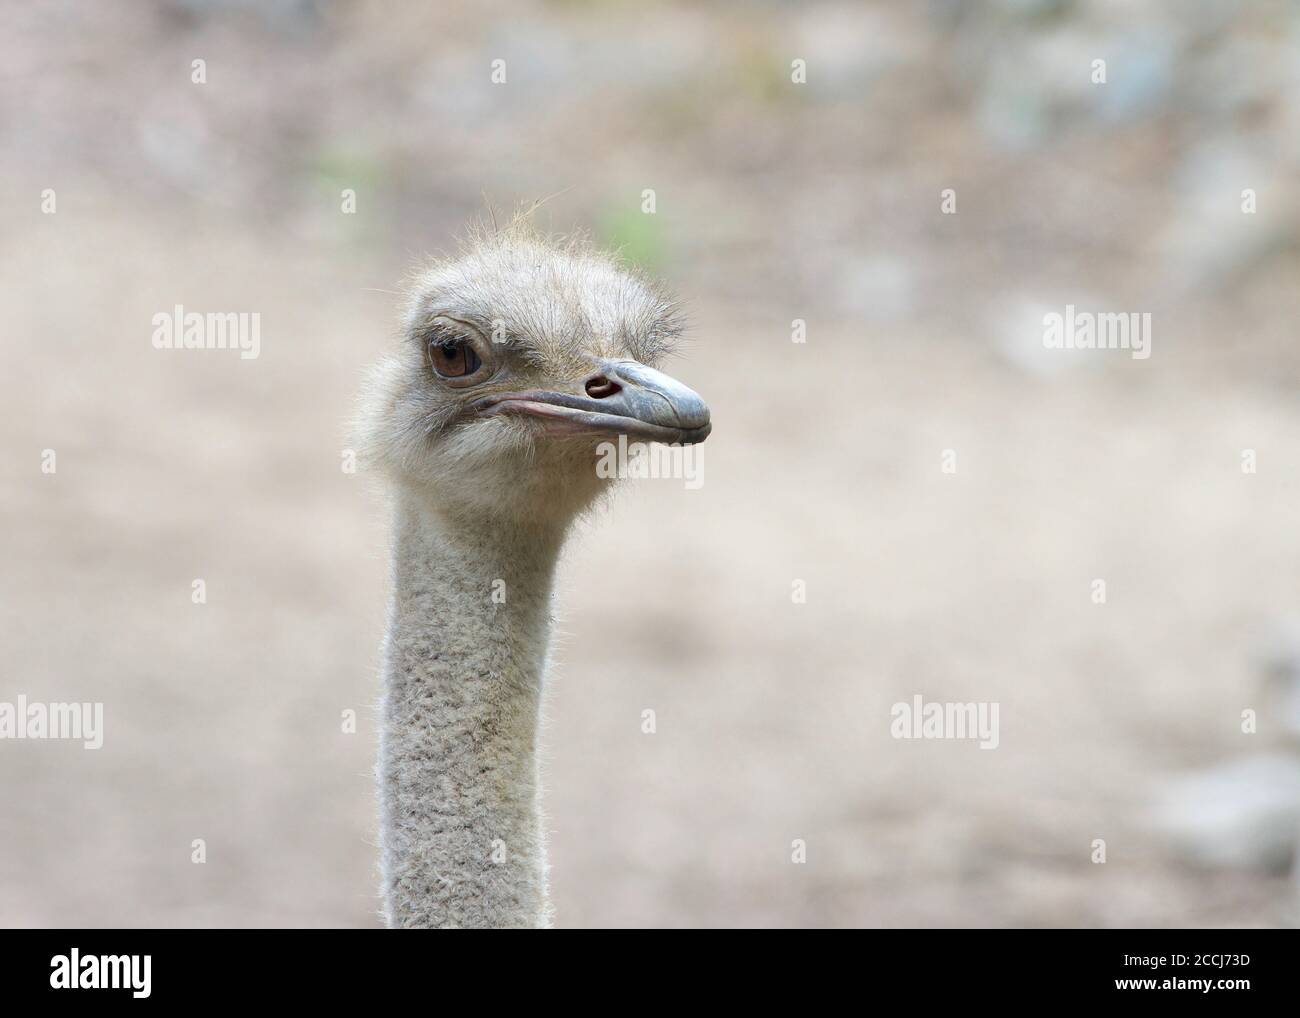 Portrait of one male ostrich looking to slightly to viewers right. The ostrich is a large flightless birds native to Africa. Stock Photo